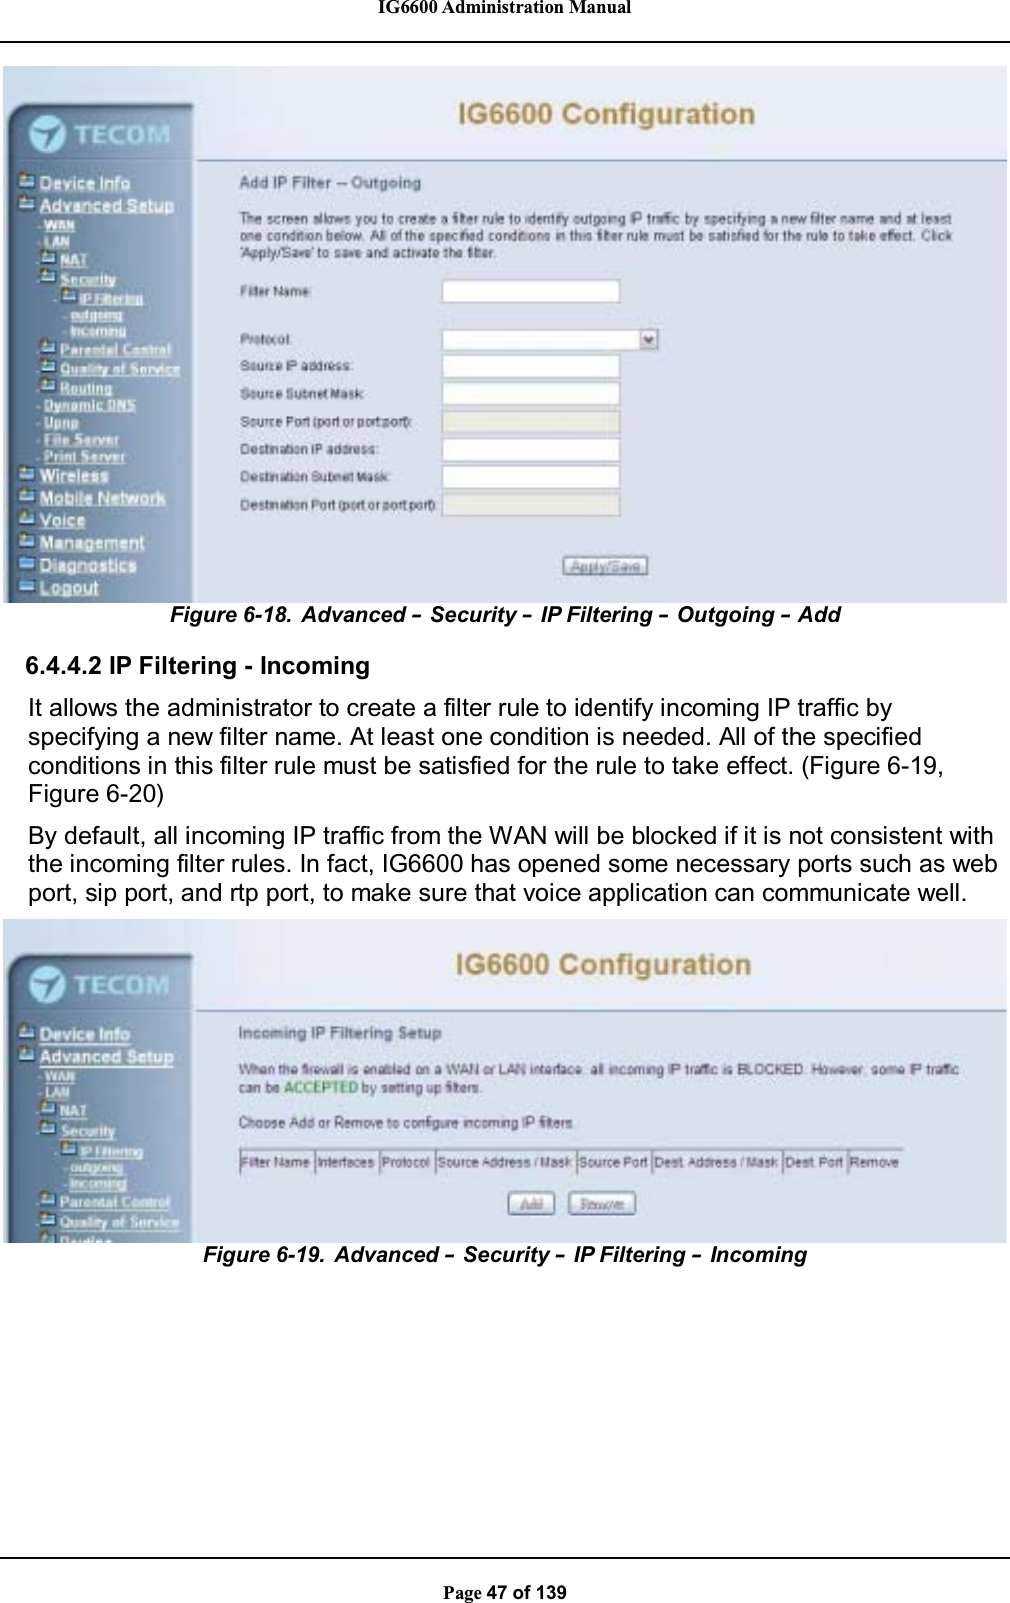 IG6600 Administration ManualPage 47 of 139Figure 6-18. Advanced –Security –IP Filtering – Outgoing –Add6.4.4.2 IP Filtering - IncomingIt allows the administrator to create a filter rule to identify incoming IP traffic byspecifying a new filter name. At least one condition is needed. All of the specifiedconditions in this filter rule must be satisfied for the rule to take effect. (Figure 6-19,Figure 6-20)By default, all incoming IP traffic from the WAN will be blocked if it is not consistent withthe incoming filter rules. In fact, IG6600 has opened some necessary ports such as webport, sip port, and rtp port, to make sure that voice application can communicate well.Figure 6-19. Advanced –Security –IP Filtering –Incoming